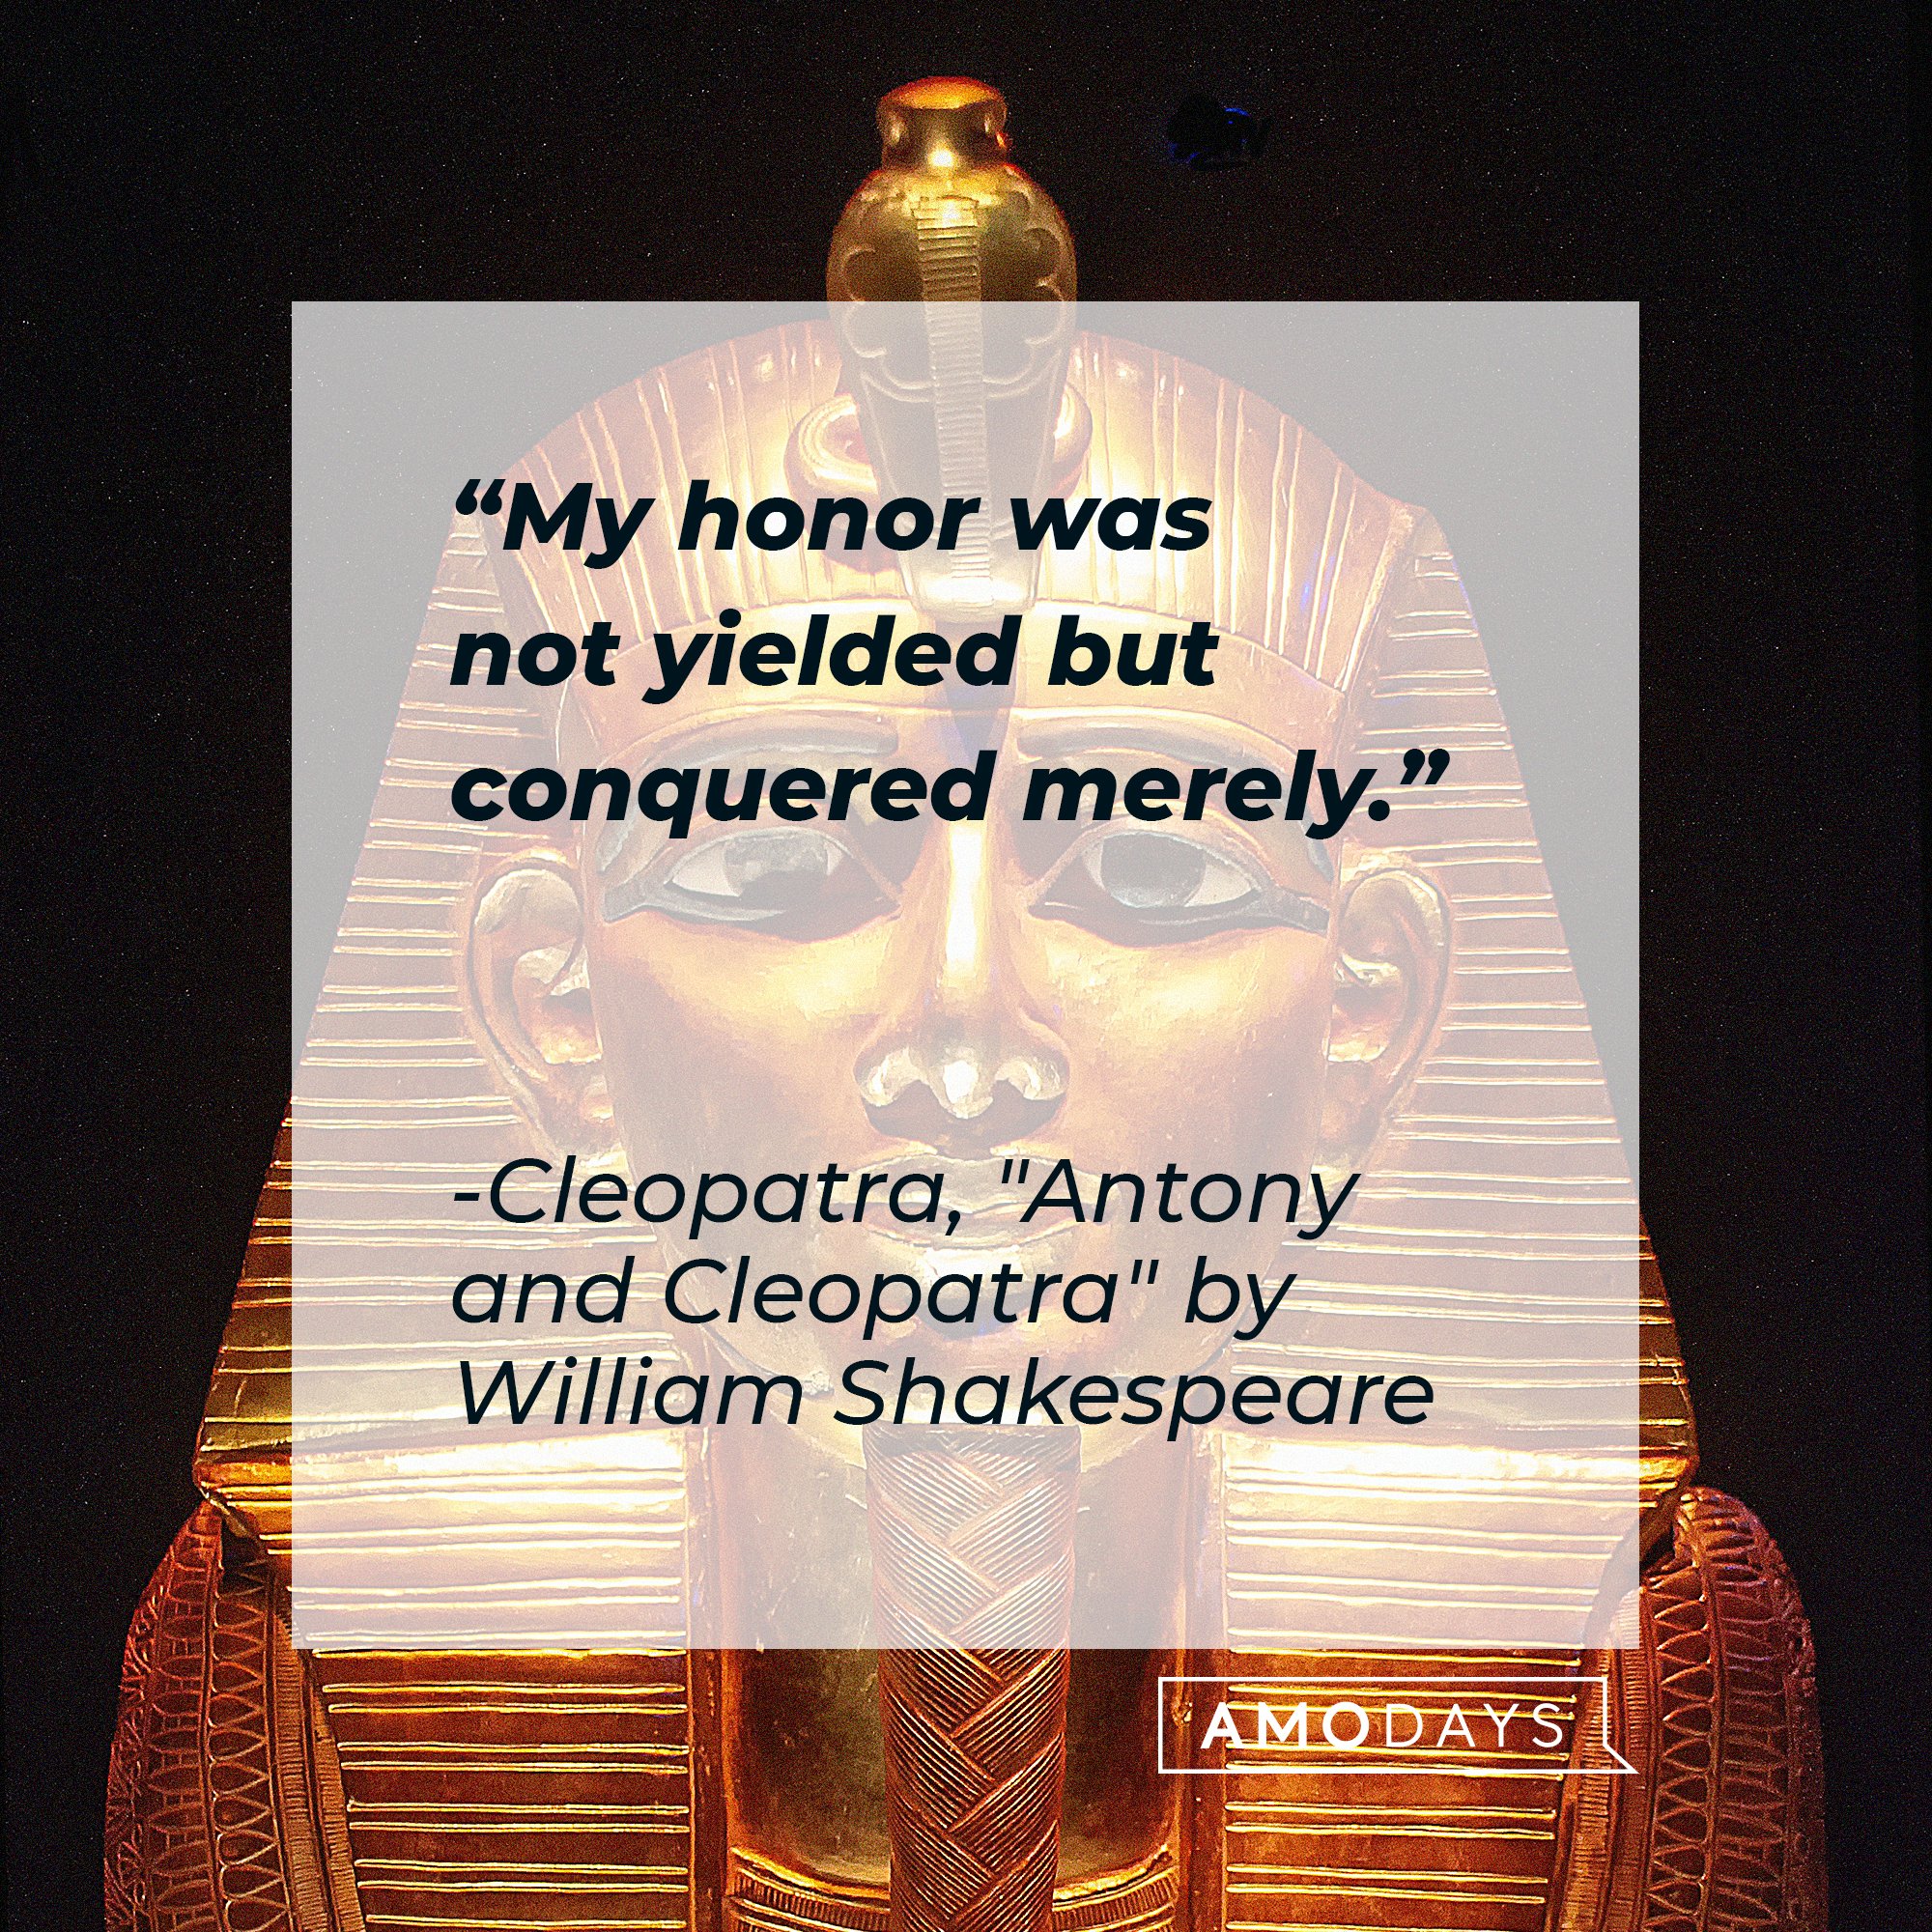  Cleopatra’s quote from Antony and Cleopatra" by William Shakespeare: "My honor was not yielded but conquered merely." | Image: AmoDays